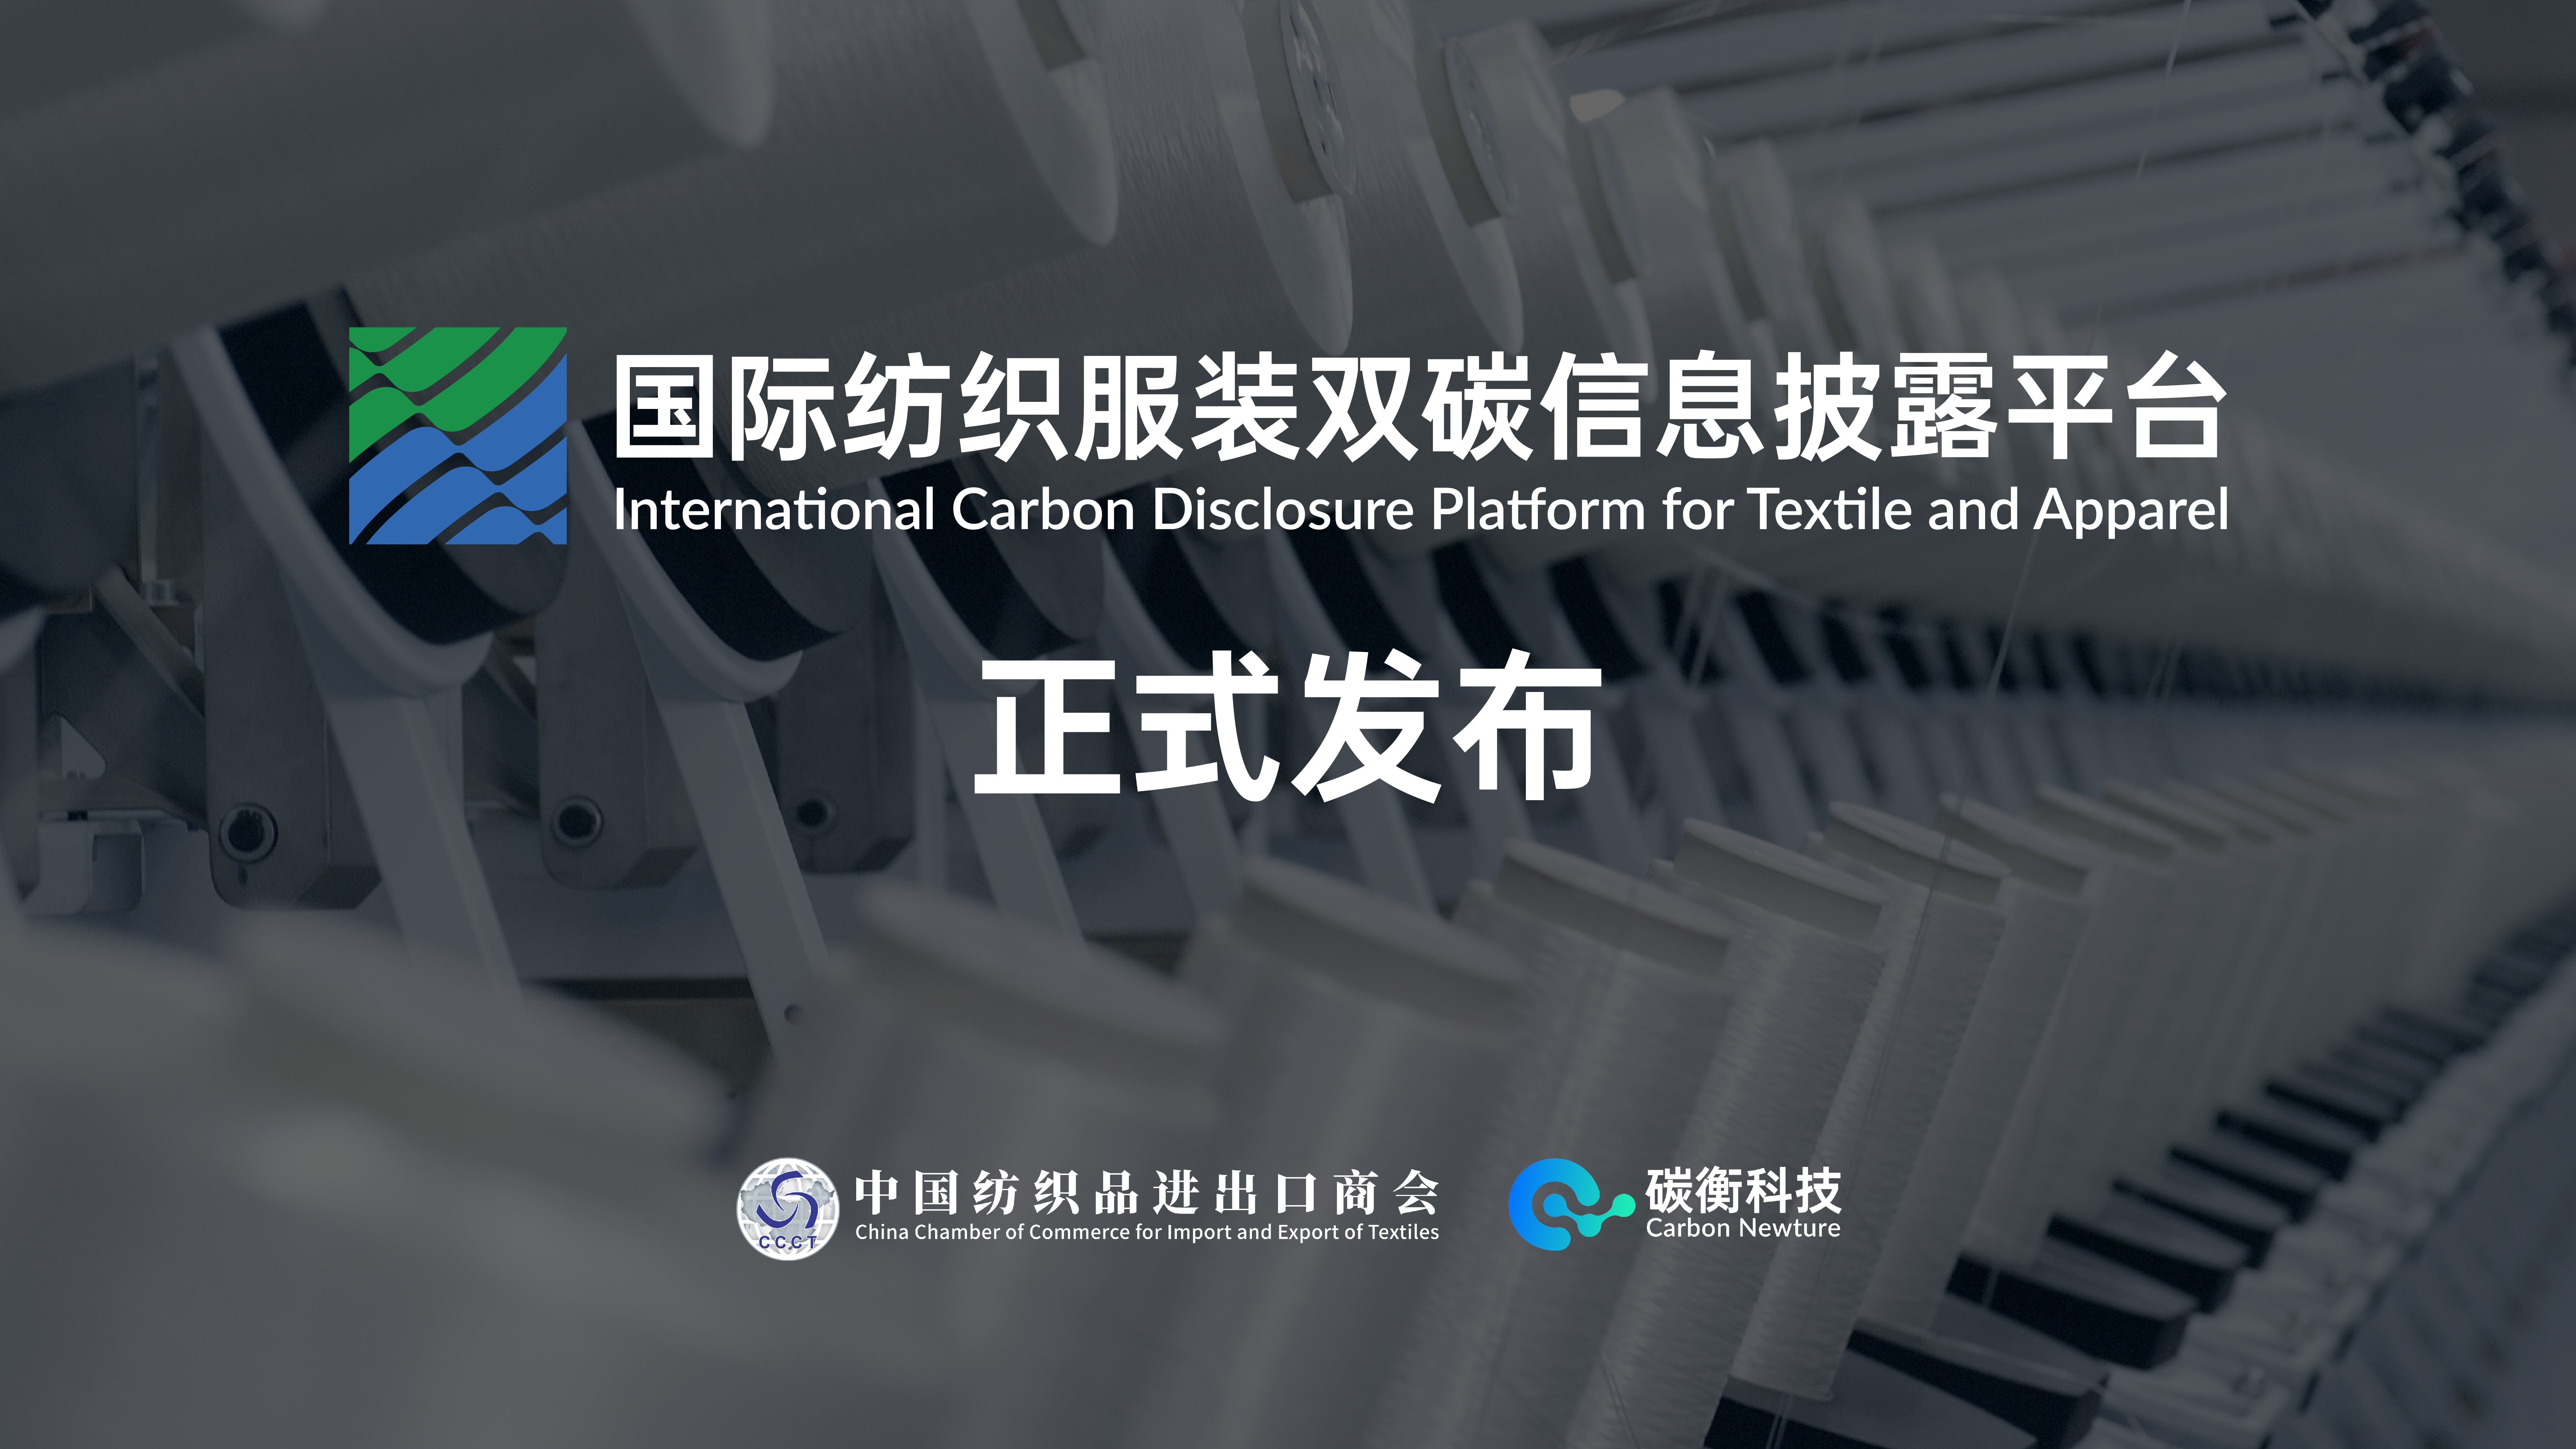 Celebrated International Carbon Disclosure Platform for Textile and Apparel Launches